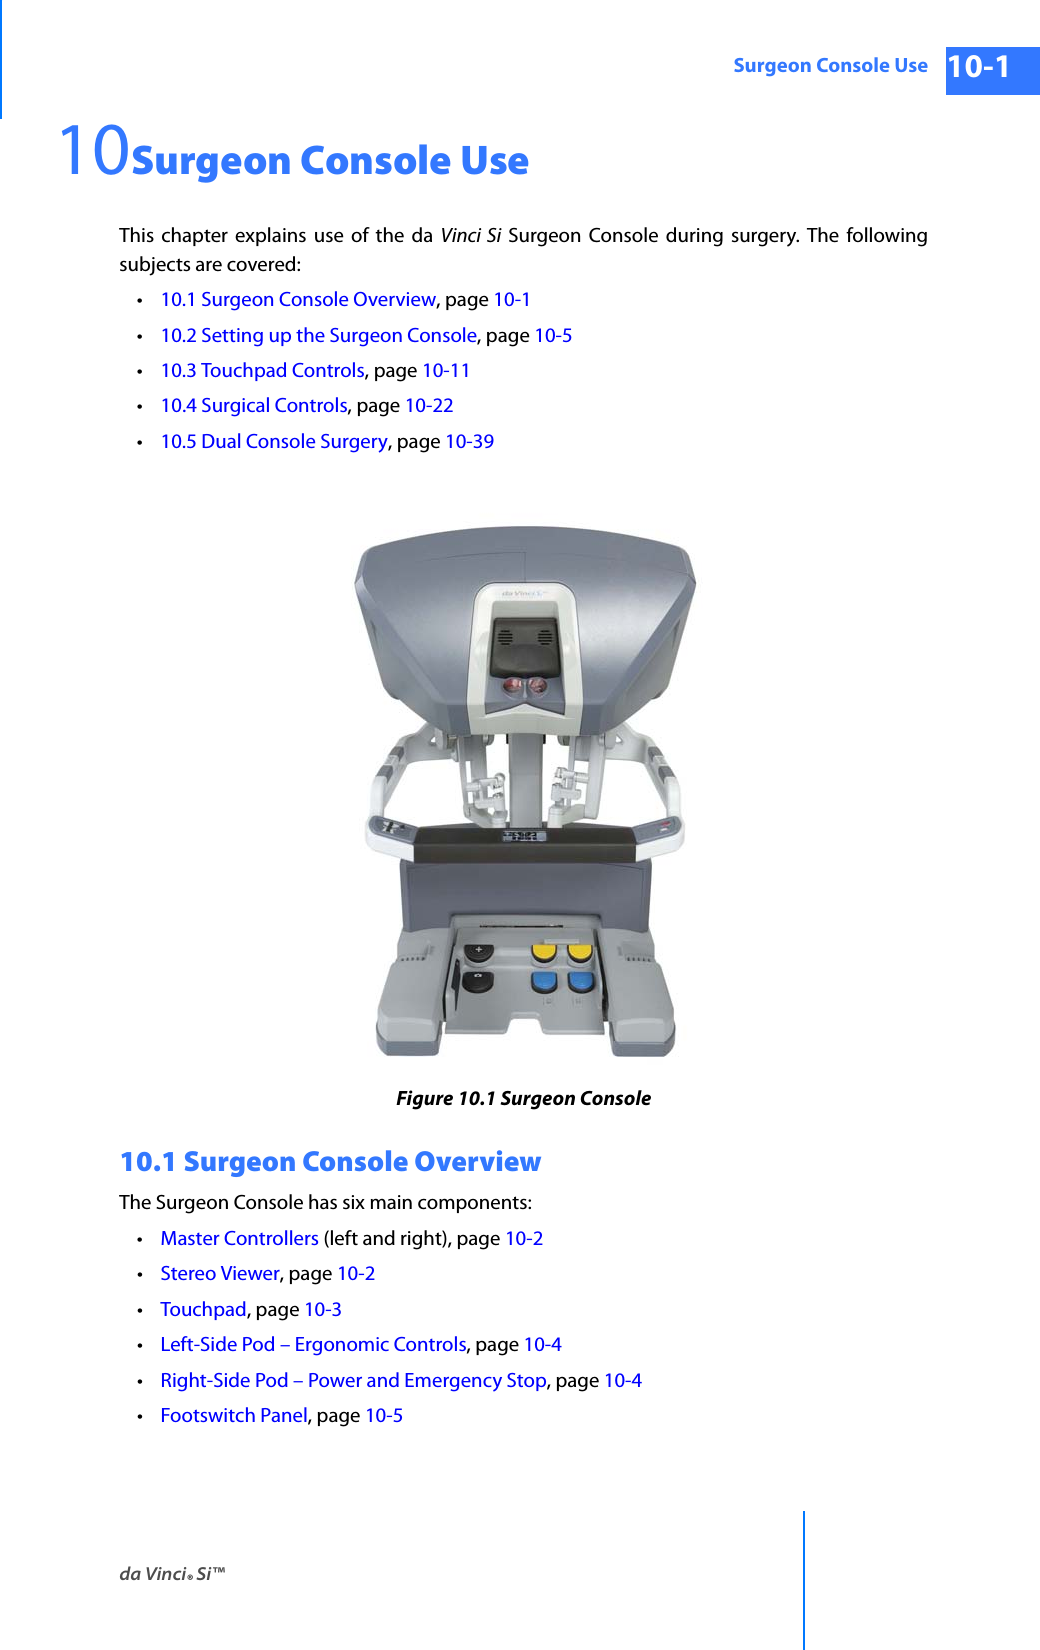 da Vinci® Si™Surgeon Console Use 10-1DRAFT/PRE-RELEASE/CONFIDENTIAL 10/9/1410Surgeon Console UseThis chapter explains use of the da Vinci Si Surgeon Console during surgery. The following subjects are covered: •10.1 Surgeon Console Overview, page 10-1•10.2 Setting up the Surgeon Console, page 10-5•10.3 Touchpad Controls, page 10-11•10.4 Surgical Controls, page 10-22•10.5 Dual Console Surgery, page 10-39Figure 10.1 Surgeon Console10.1 Surgeon Console OverviewThe Surgeon Console has six main components: •Master Controllers (left and right), page 10-2•Stereo Viewer, page 10-2 •Touchpad, page 10-3•Left-Side Pod – Ergonomic Controls, page 10-4•Right-Side Pod – Power and Emergency Stop, page 10-4•Footswitch Panel, page 10-5